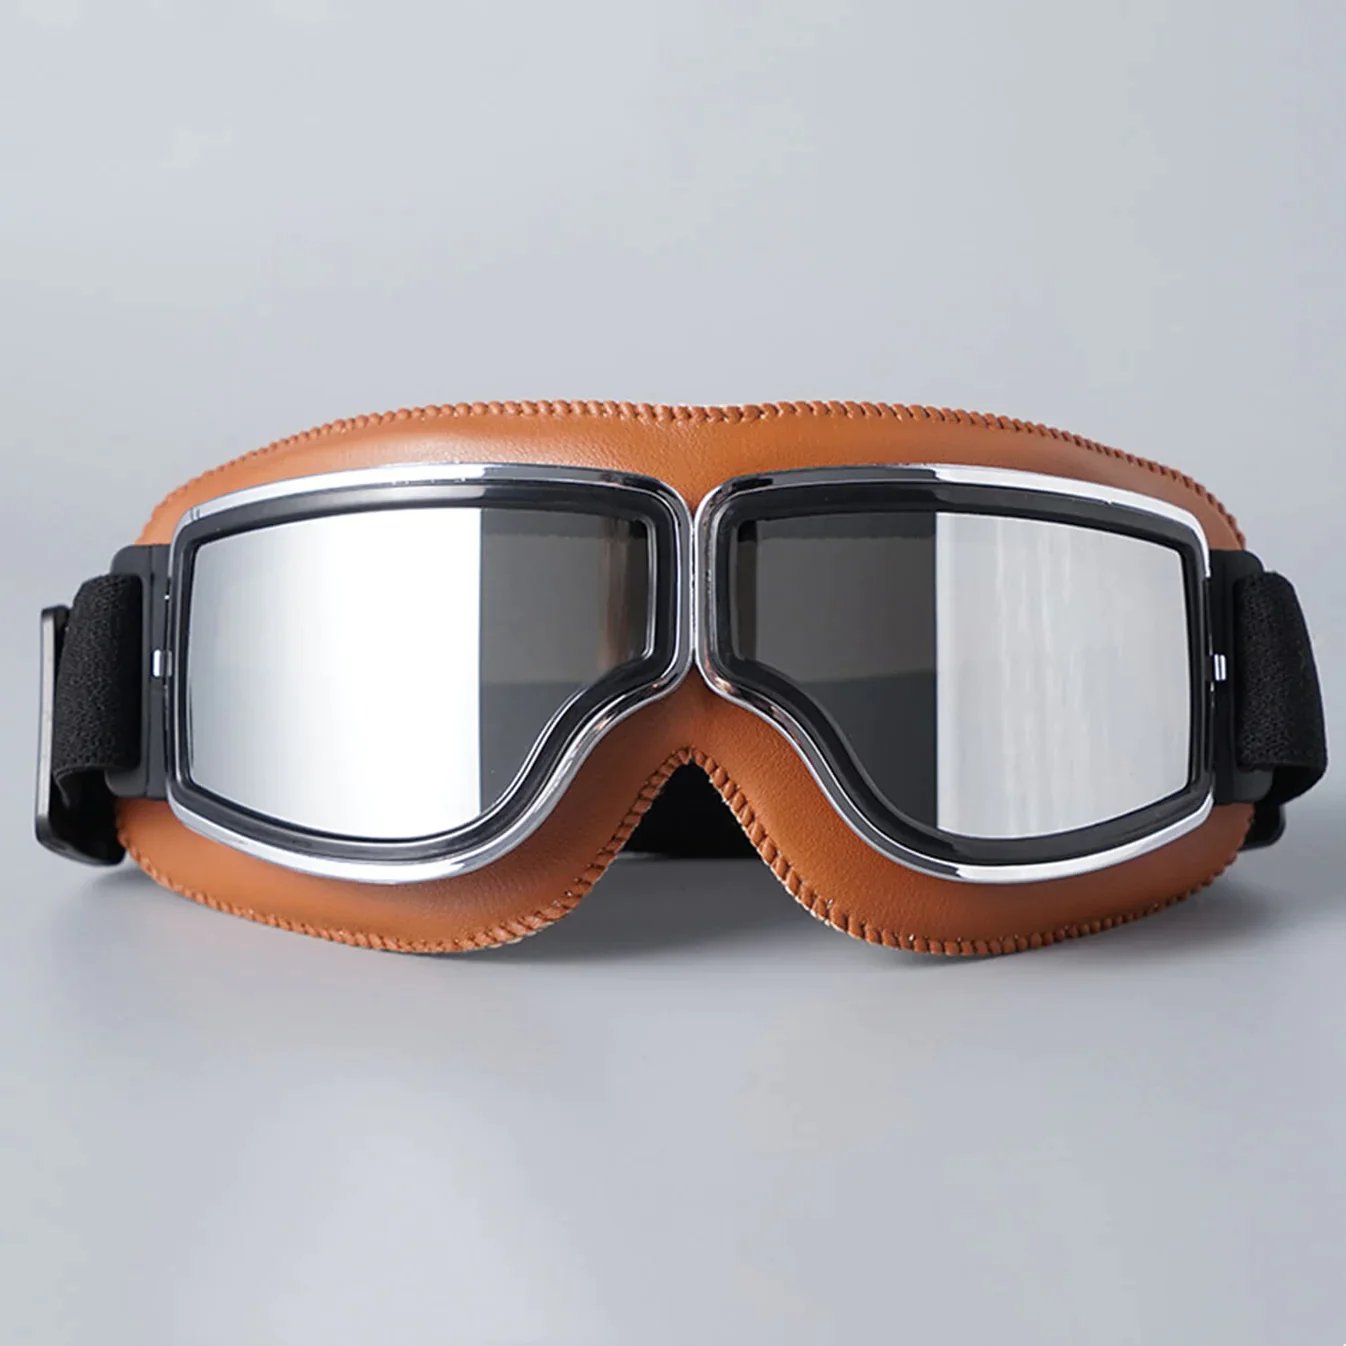 Retro Style Vintage Helmet Goggles - Enhance Your Riding Experience